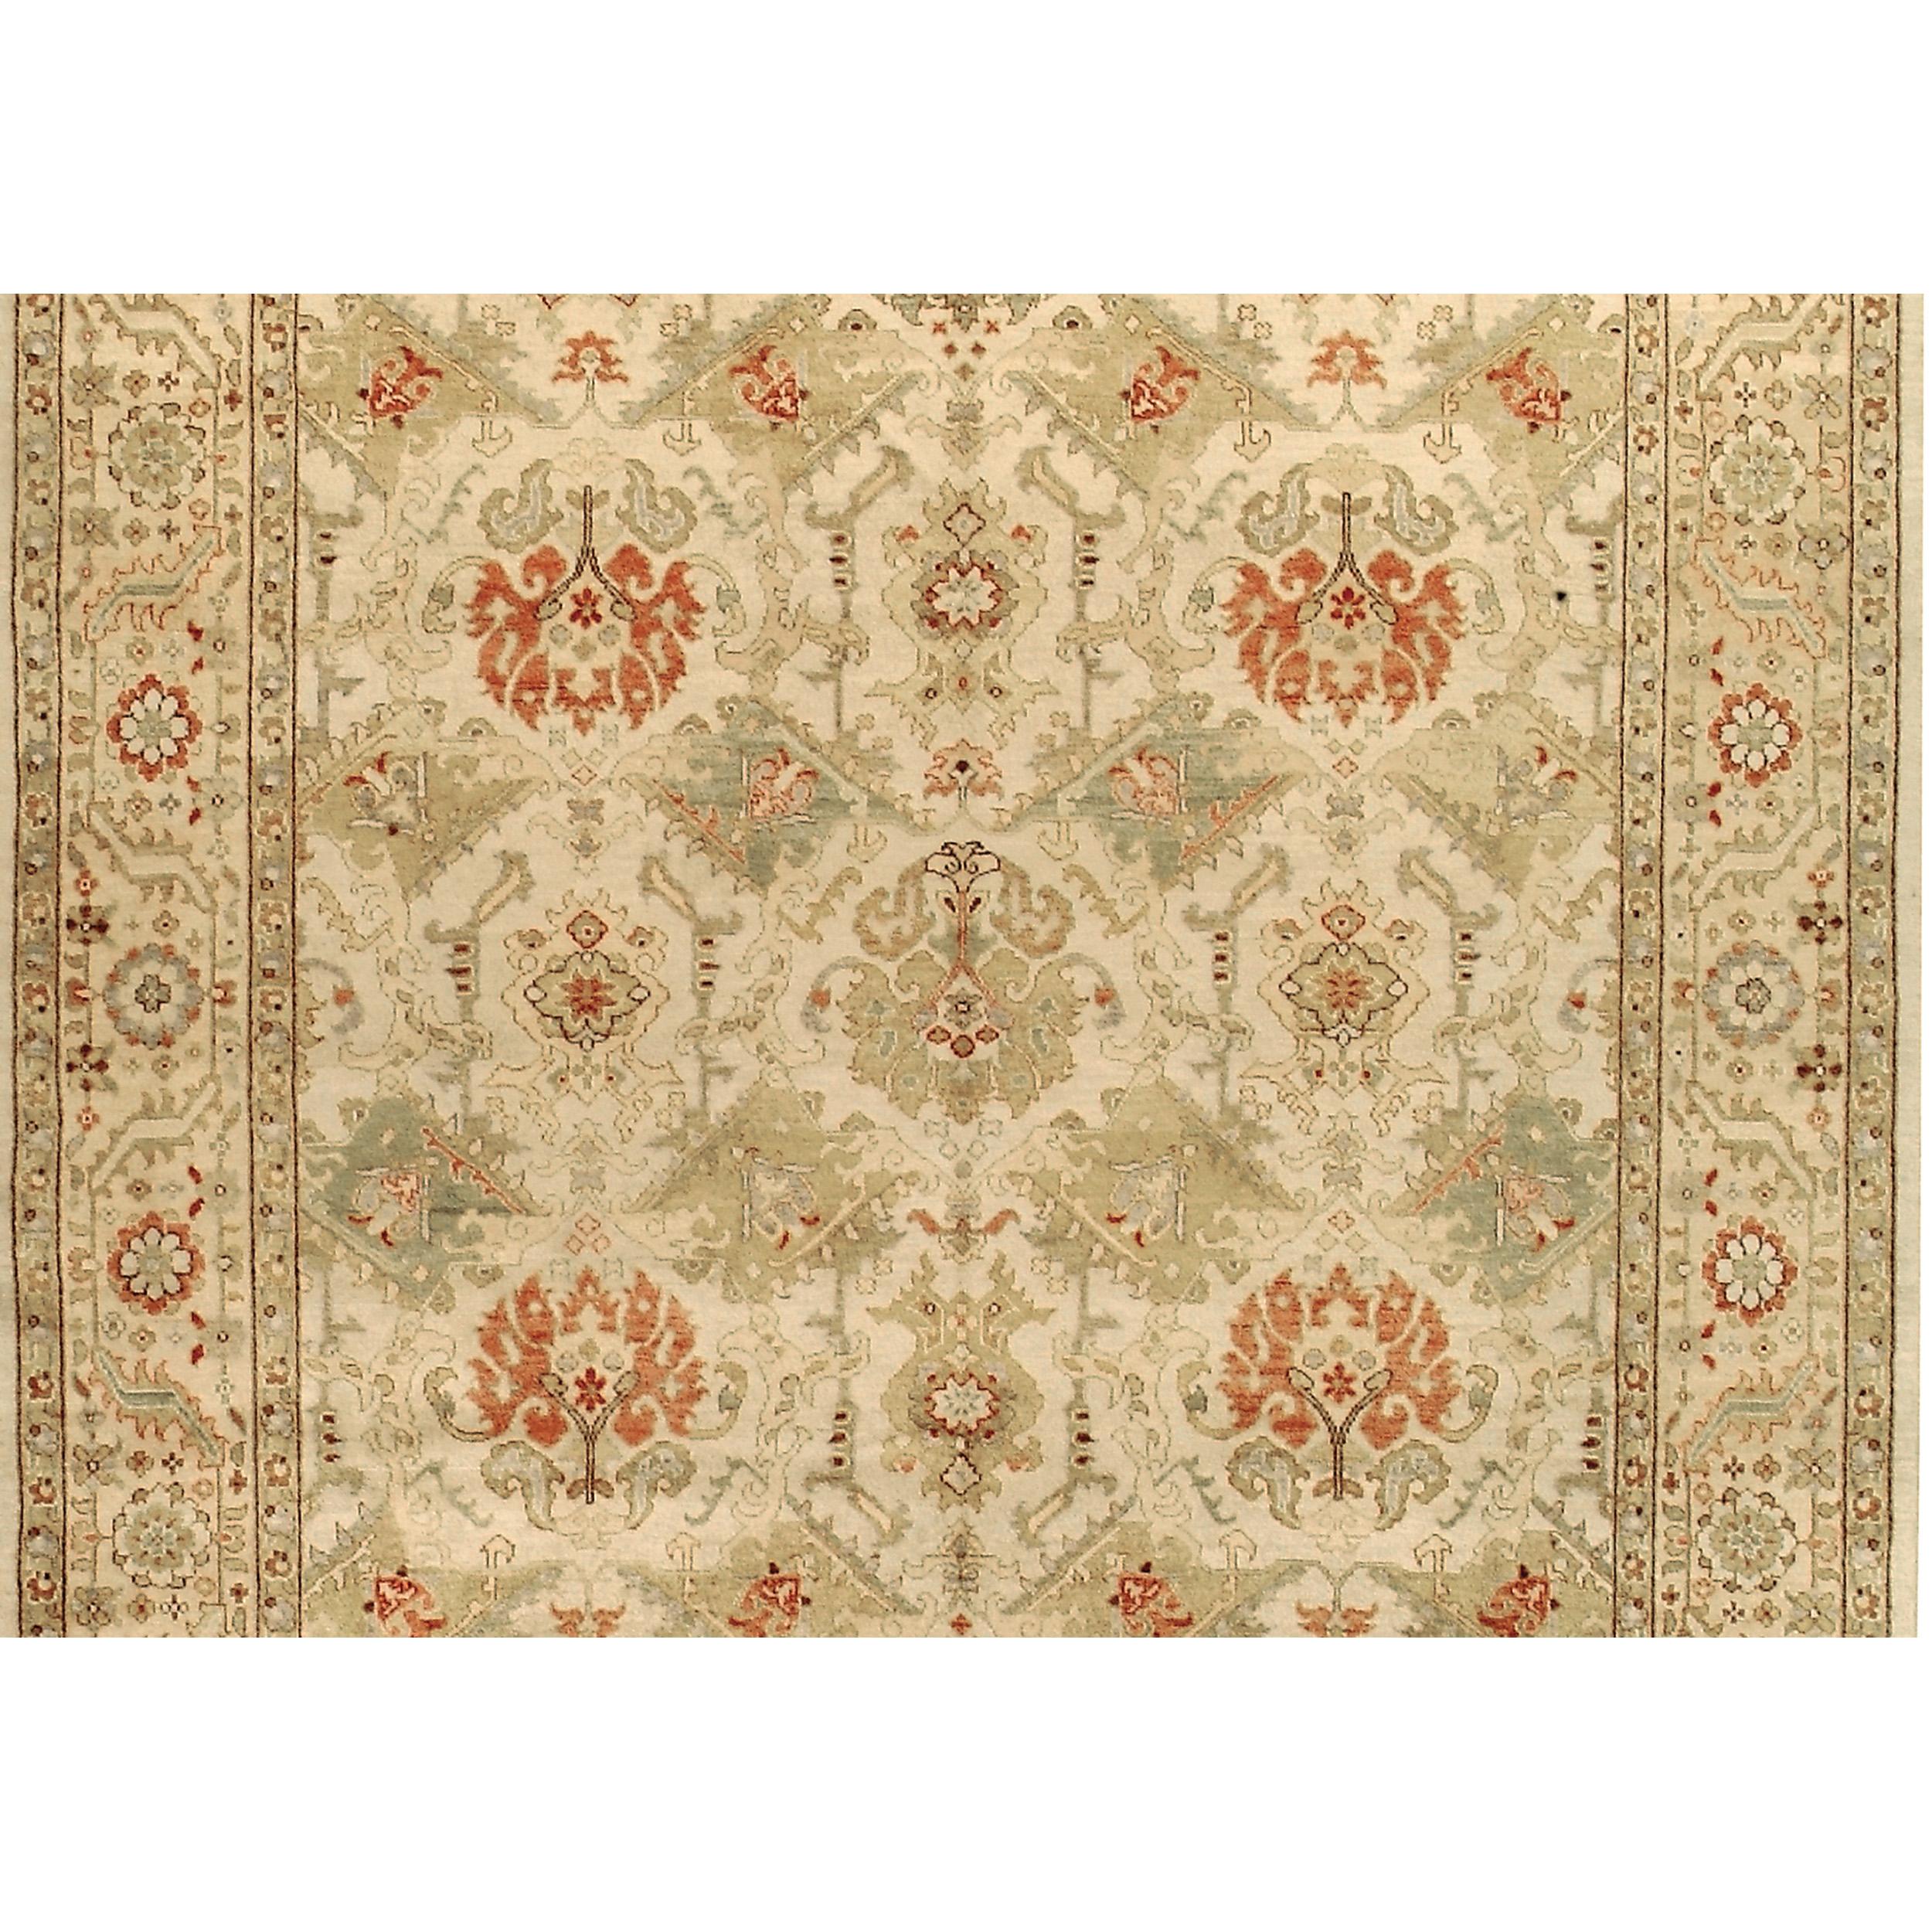 Chinese Luxury Traditional Hand-Knotted Mahal Cream and Saffron 16x28 Rug For Sale